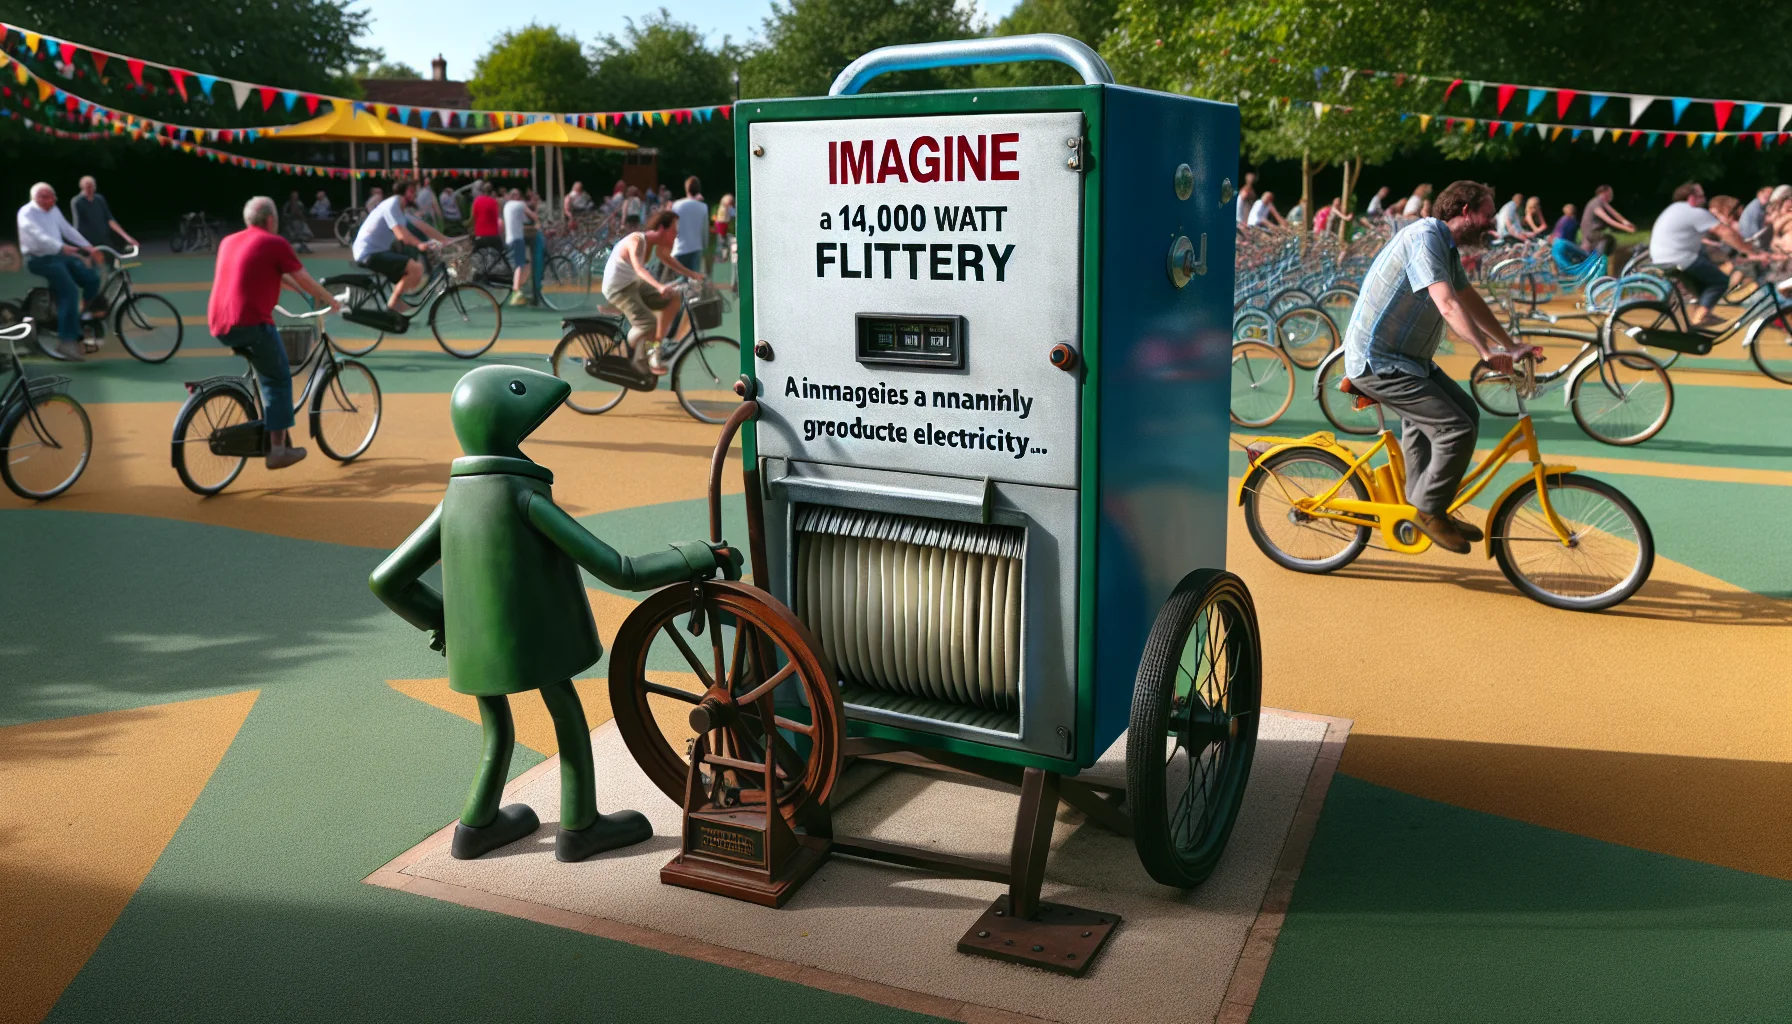 Imagine a scene where a person-sized 14,000 Watt filter is portrayed in a creative and humorous manner, encouraging people towards generating electricity. The filter is brilliantly animated with a vibrant personality. It charmingly attempts, despite its inanimate nature, to manually produce electricity – unsuccessfully operating a vintage hand crank generator. The background is an inviting green energy park where citizens of all descents are laughing and engaged in generating electricity using various manual methods such as cycling on energy-producing bikes.